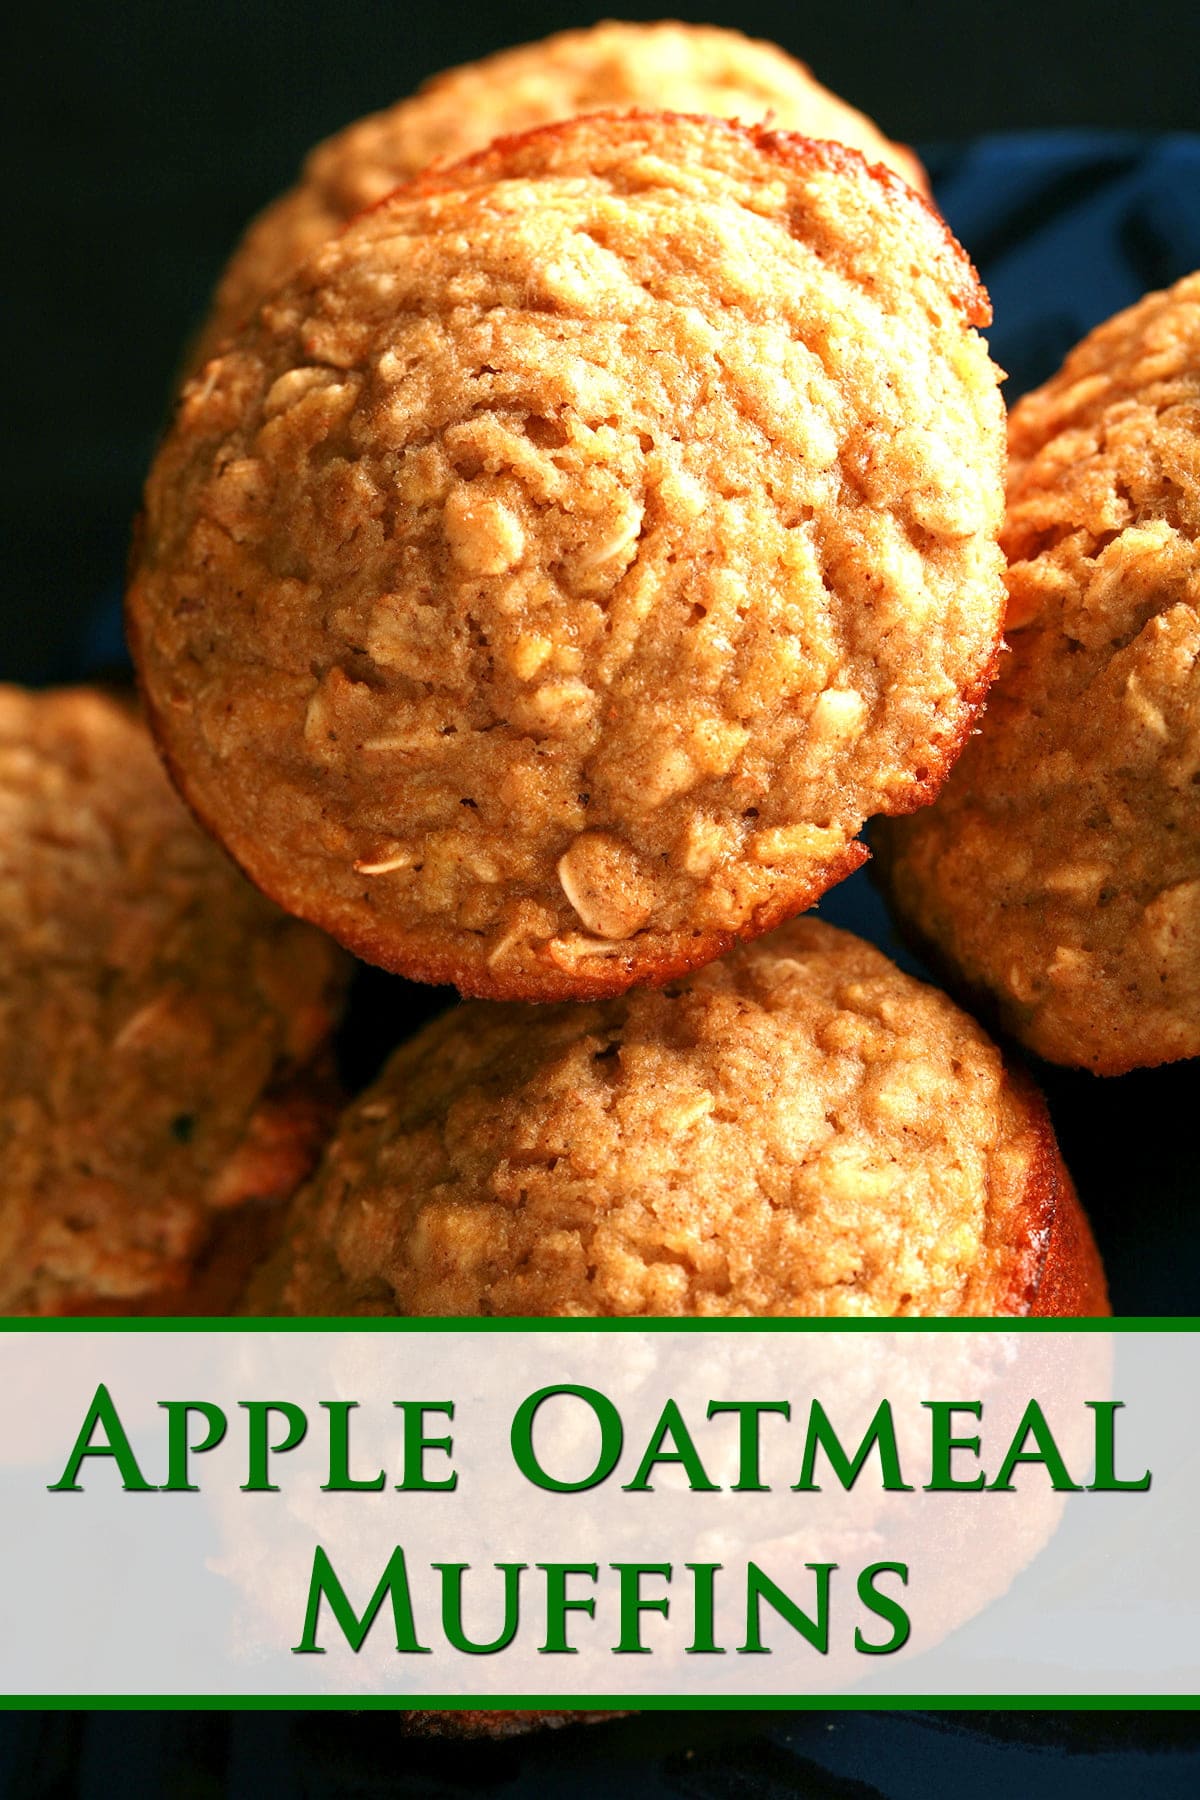 A small blue plate with a black geometric design around the edge is stacked with these healthier apple oatmeal muffins.